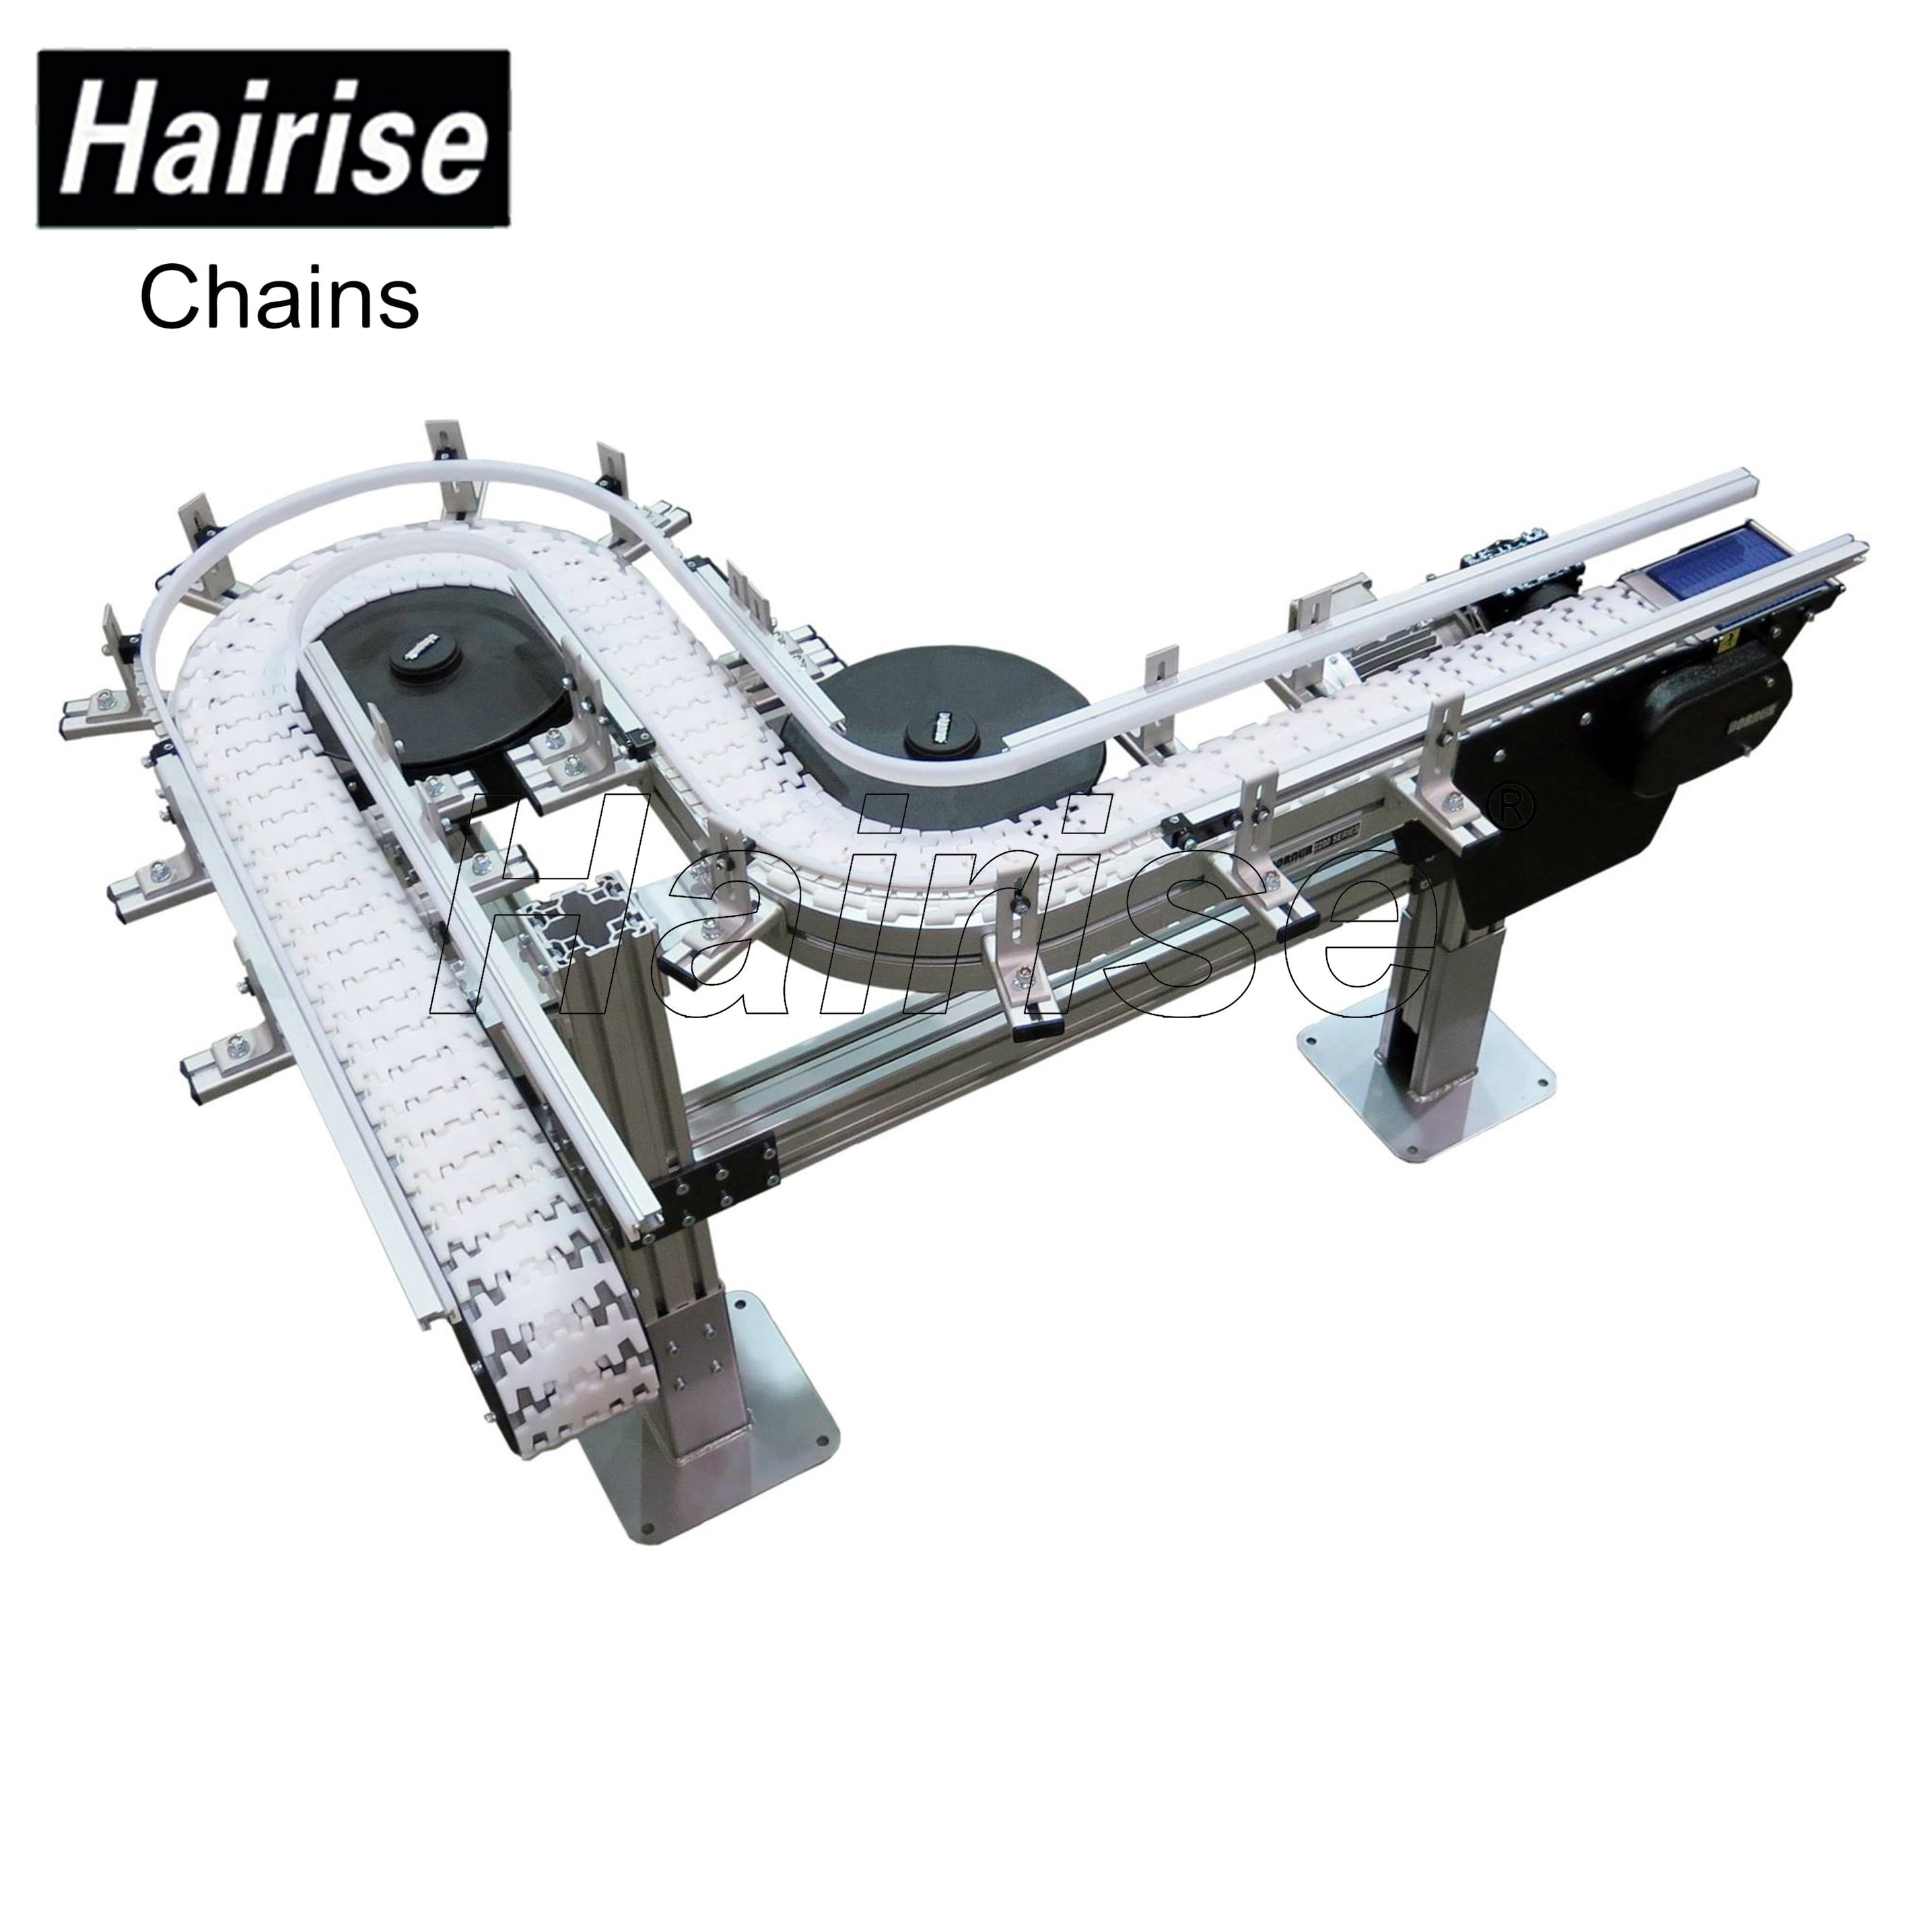 Hairise Curved Conveyors with Multiflex Chains Featured Image